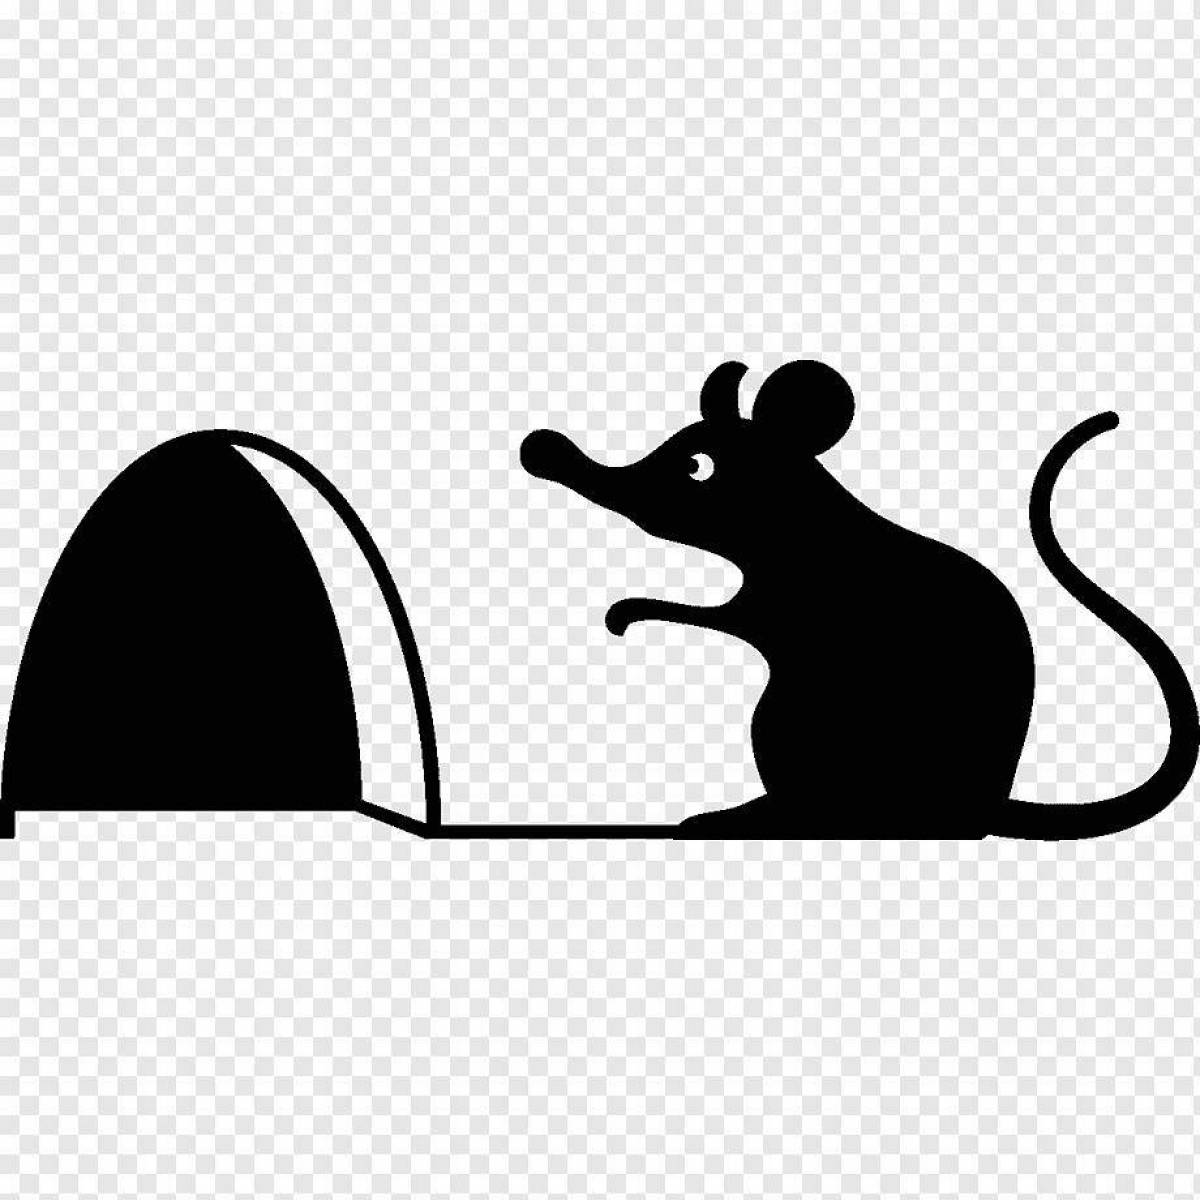 Humorous mouse in a hole